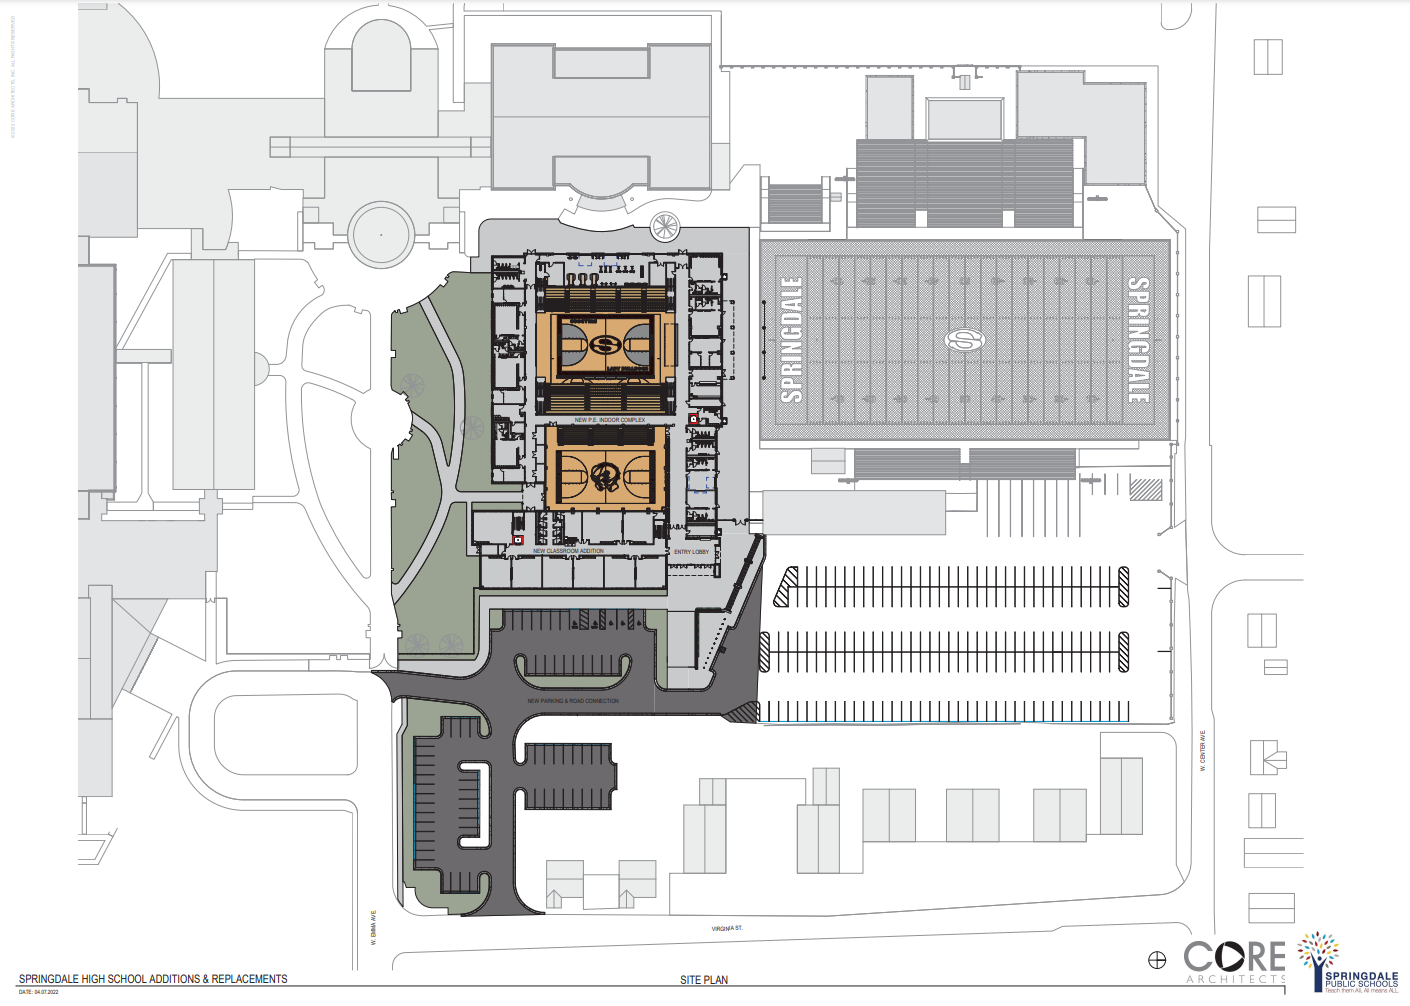 Overhead view plan of updates to SHS campus